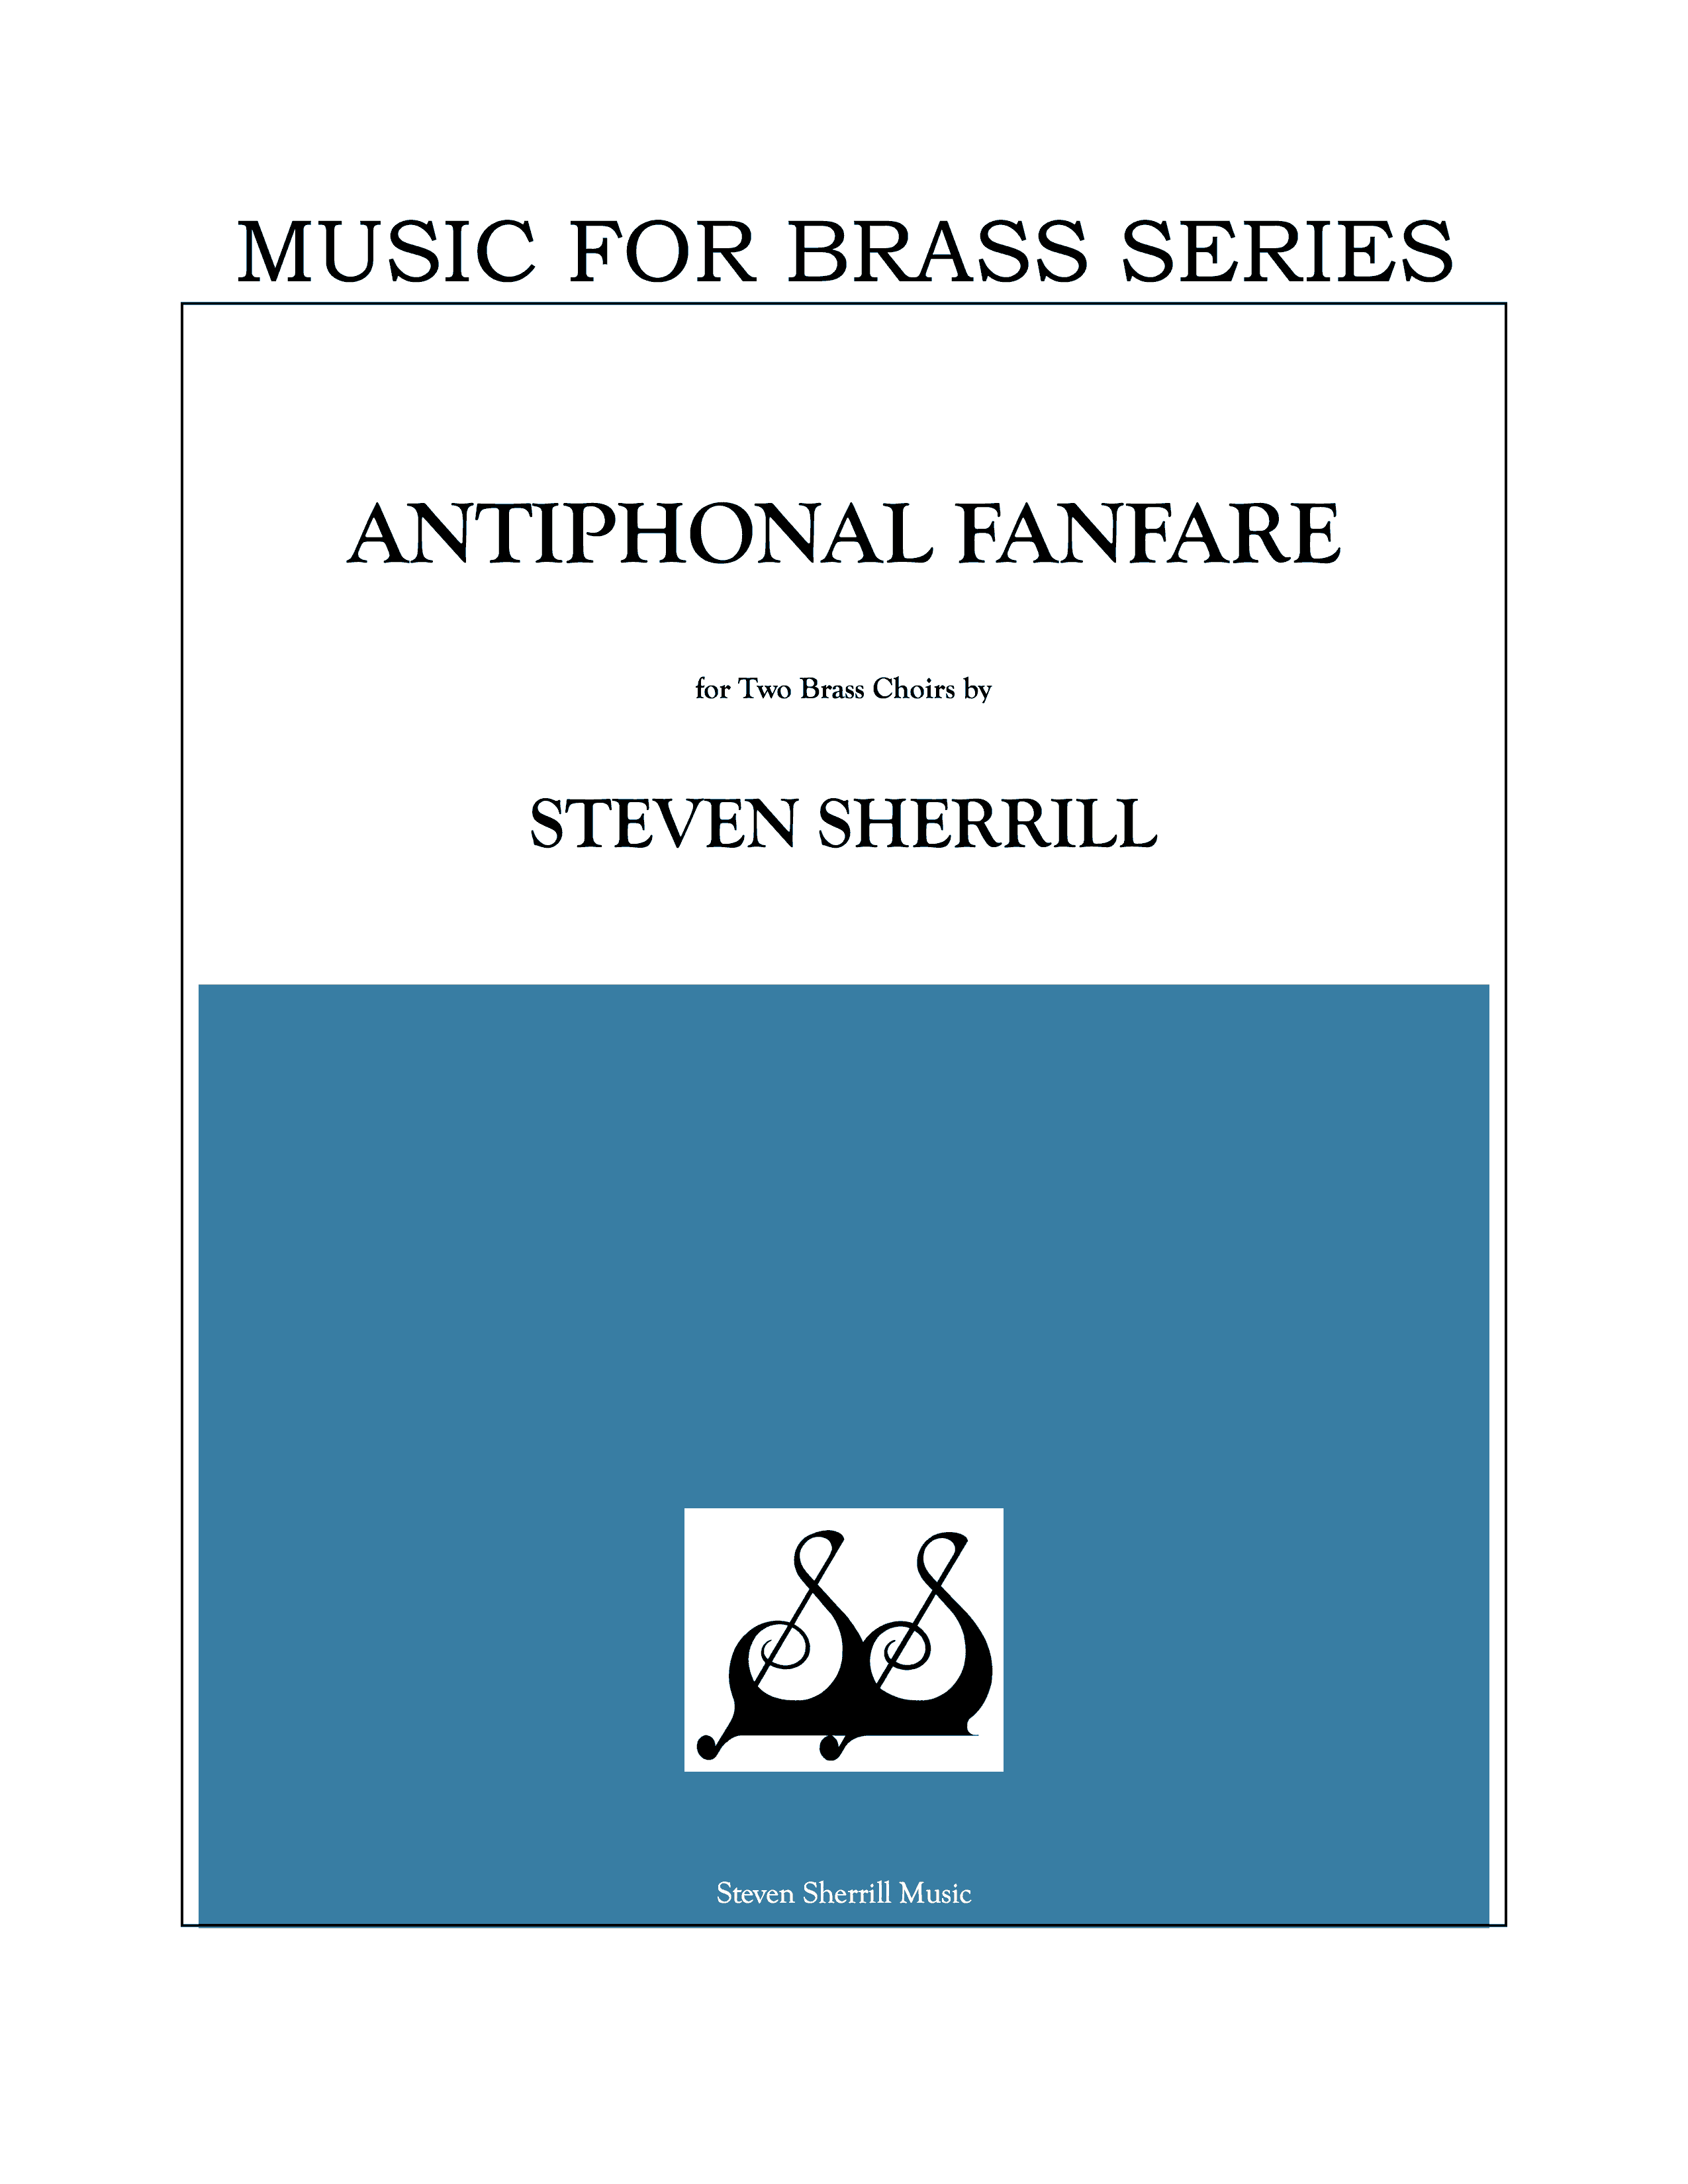 Antiphonal Fanfare cover page